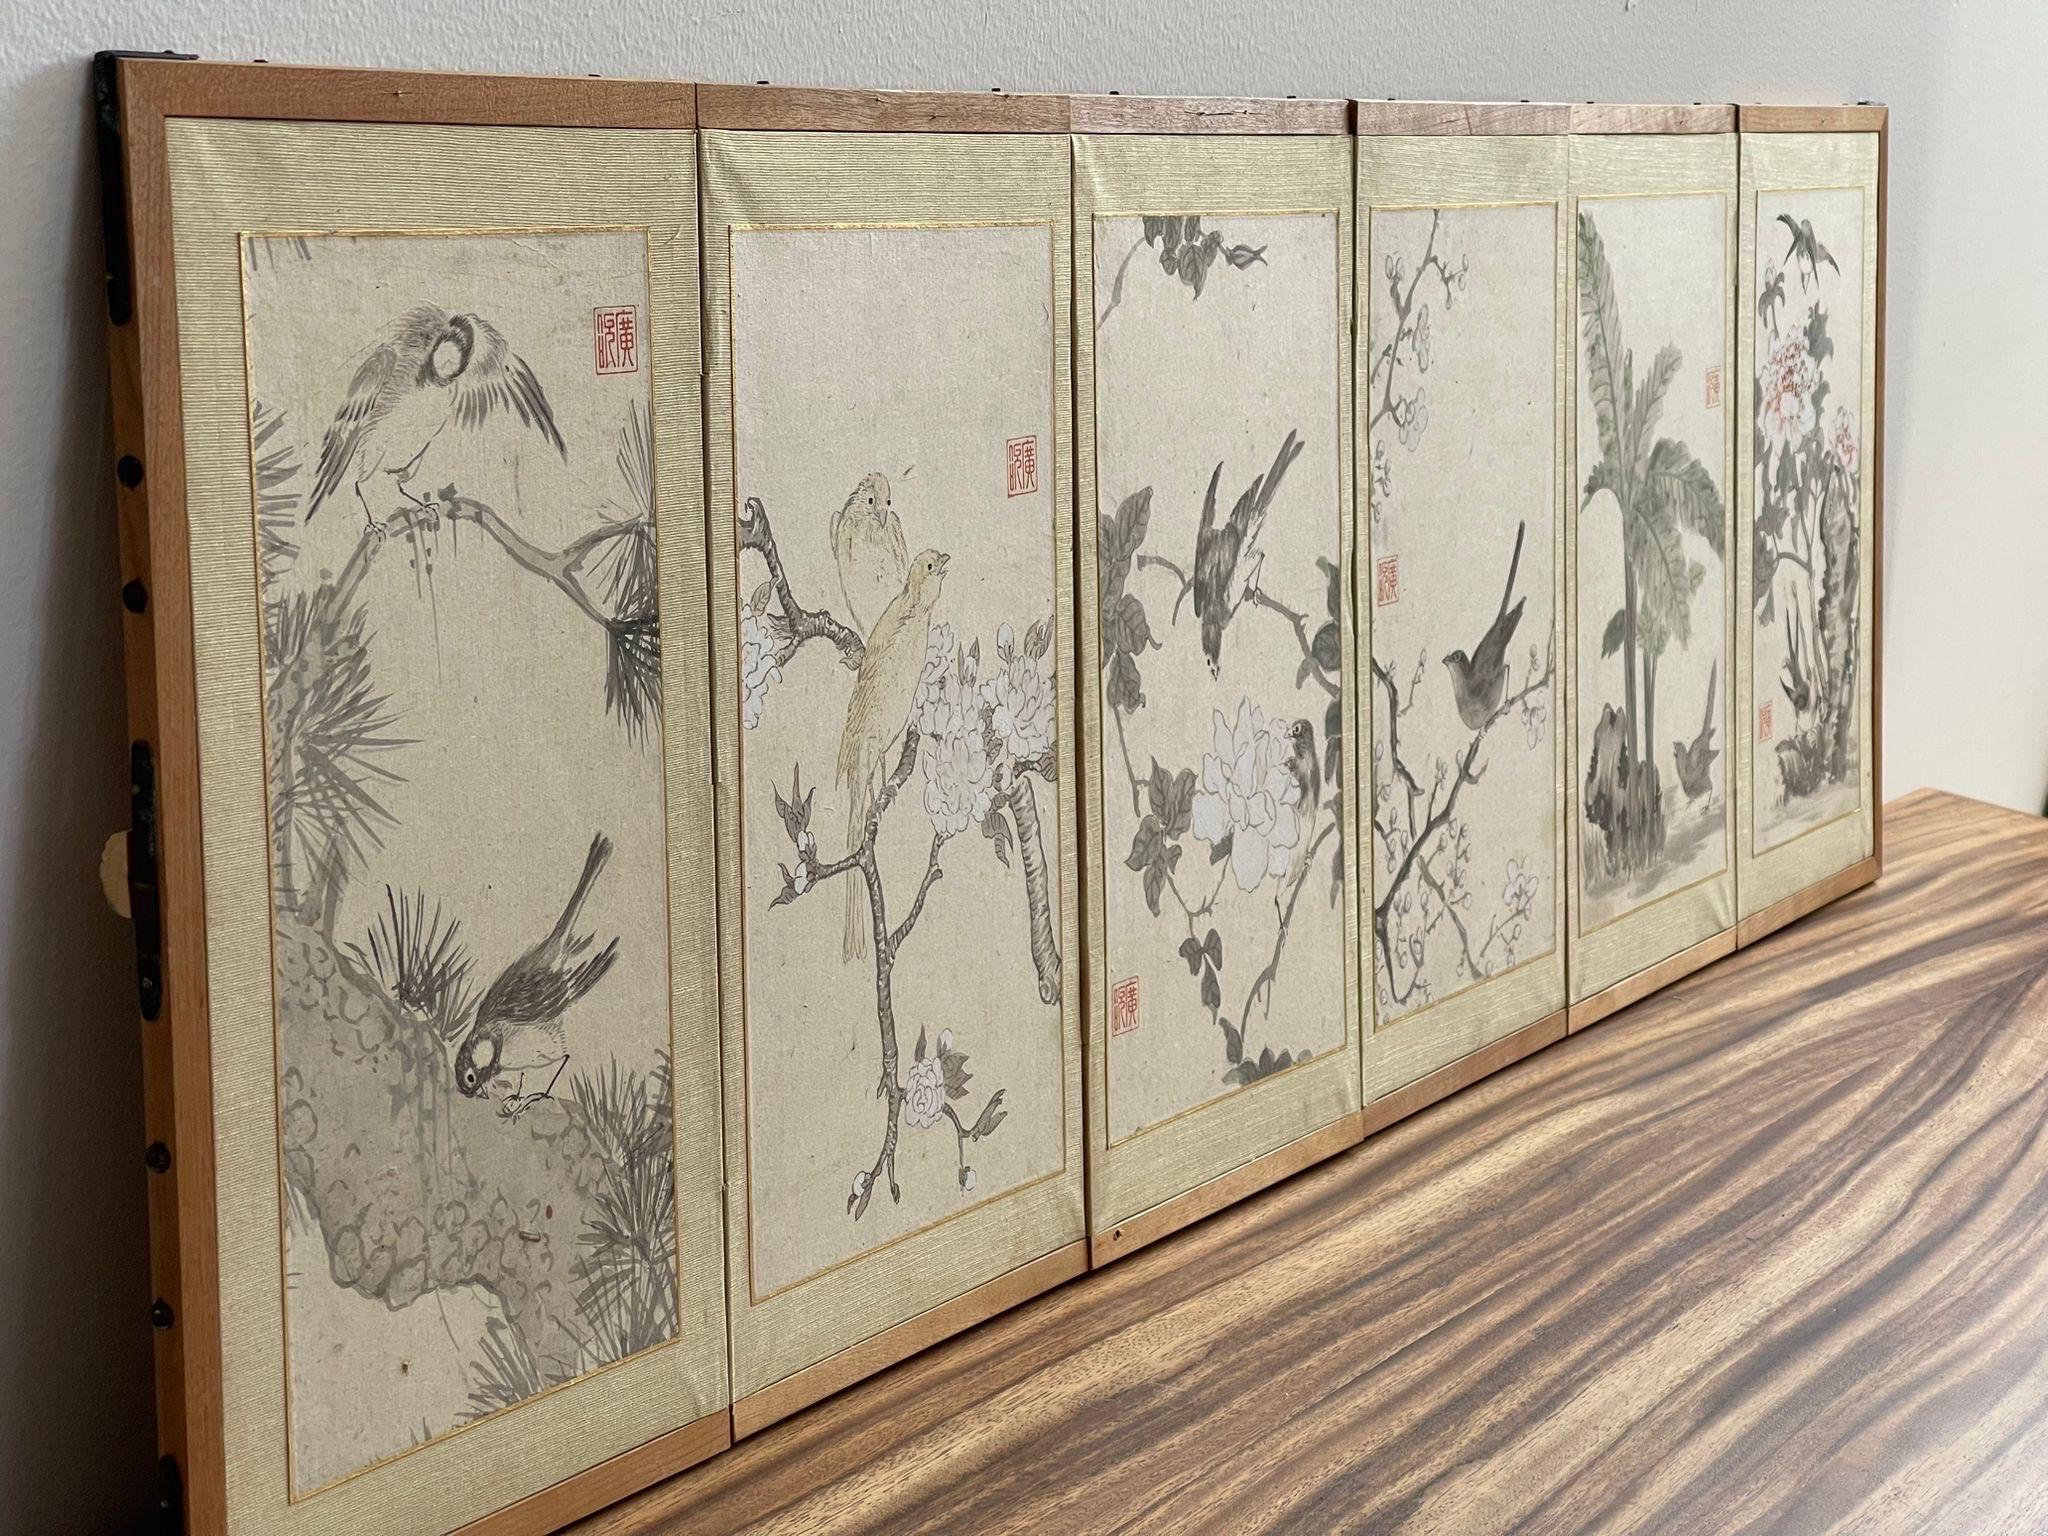 This Piece is 6 different panels of Artwork within one frame. Motifs of nature elements, birds, and flowers. Wooden frame. Vintage Condition Consistent with Age as Pictured.

Dimensions. 50 1/2 W ; 3/4 D ; 15 G